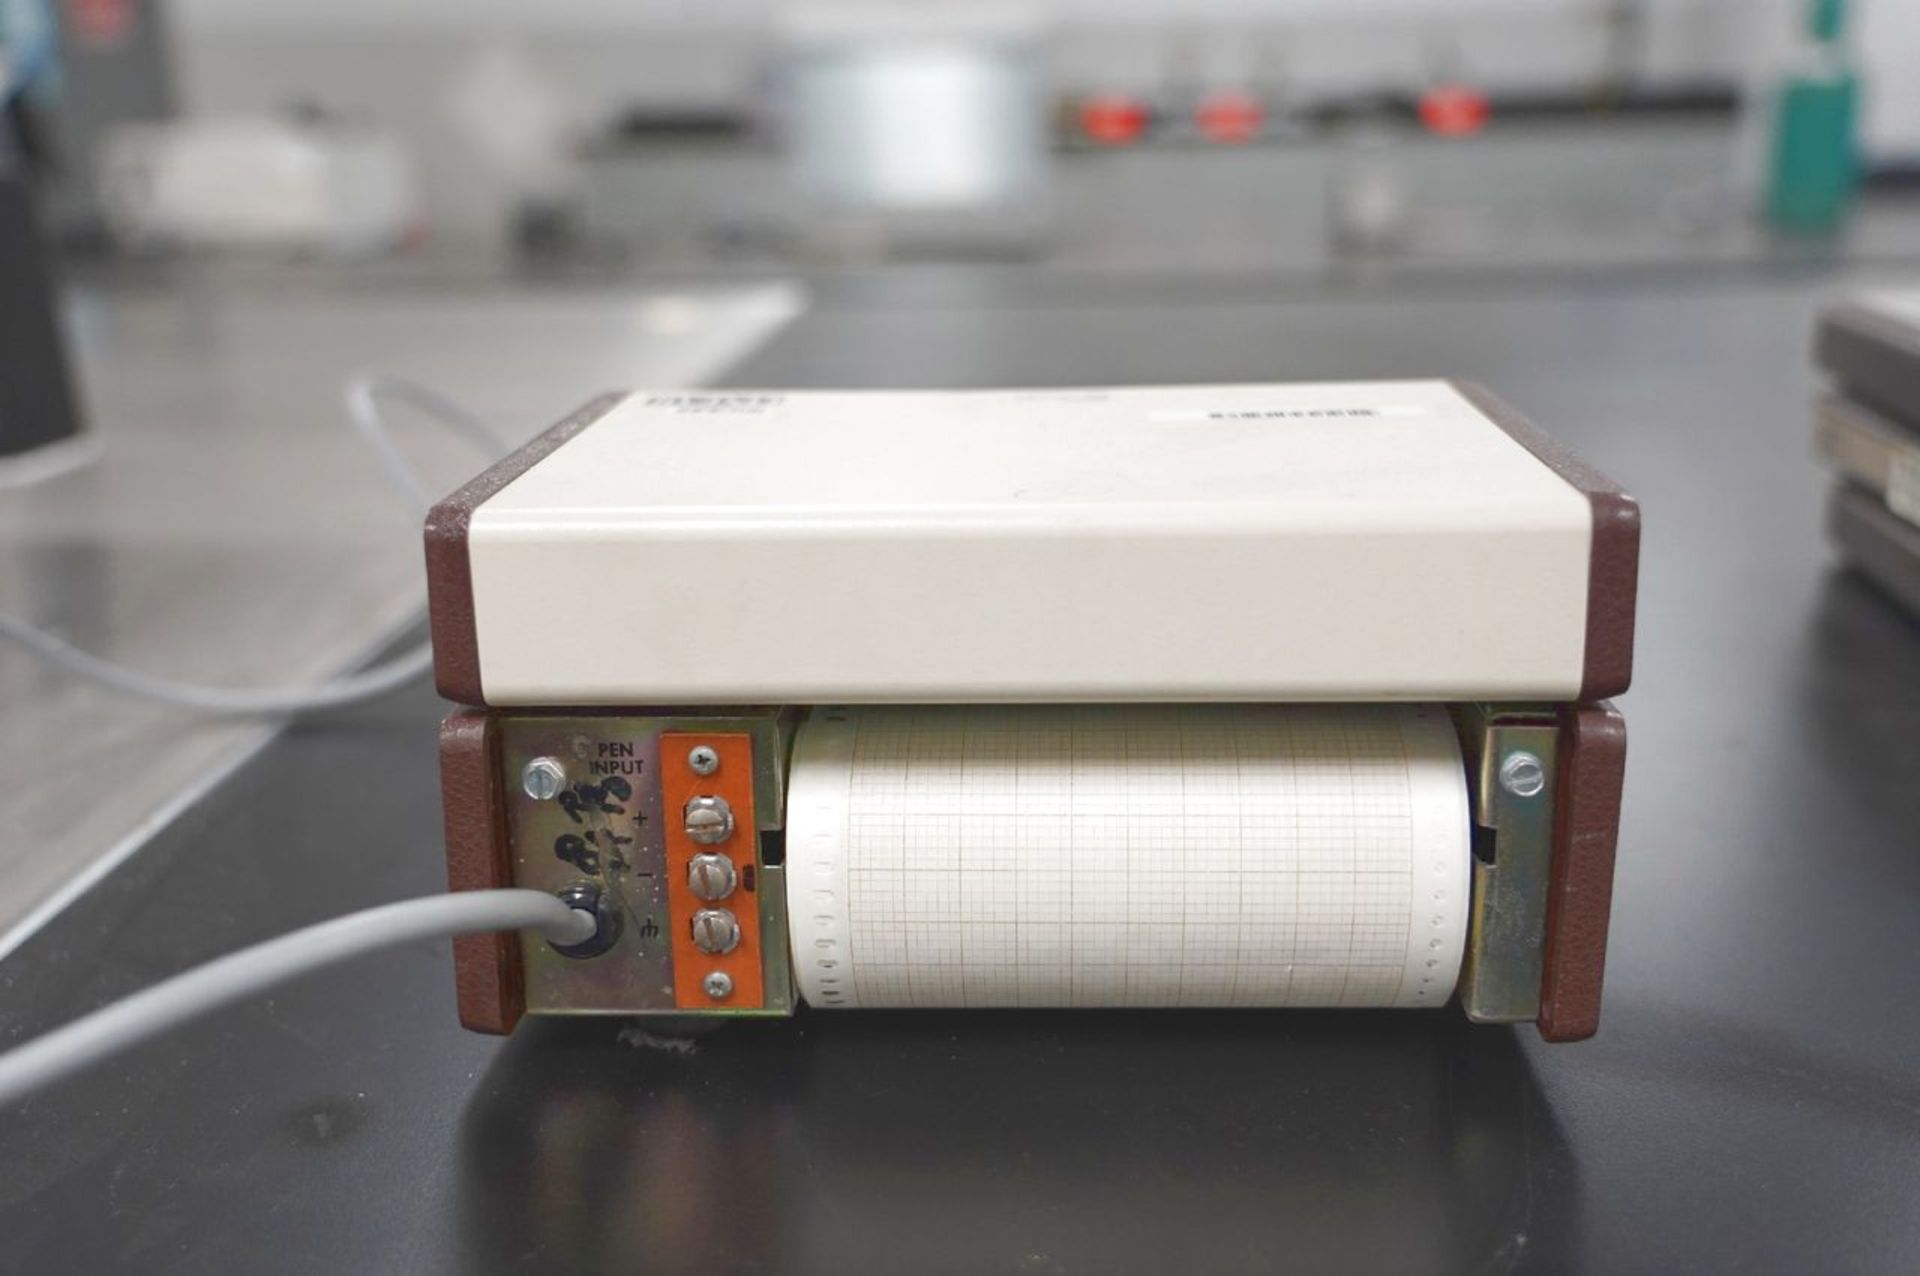 Barnstead Inernational LR92925 Channel Recorder, S/N 929040695052 (Materials Lab) - Image 3 of 5